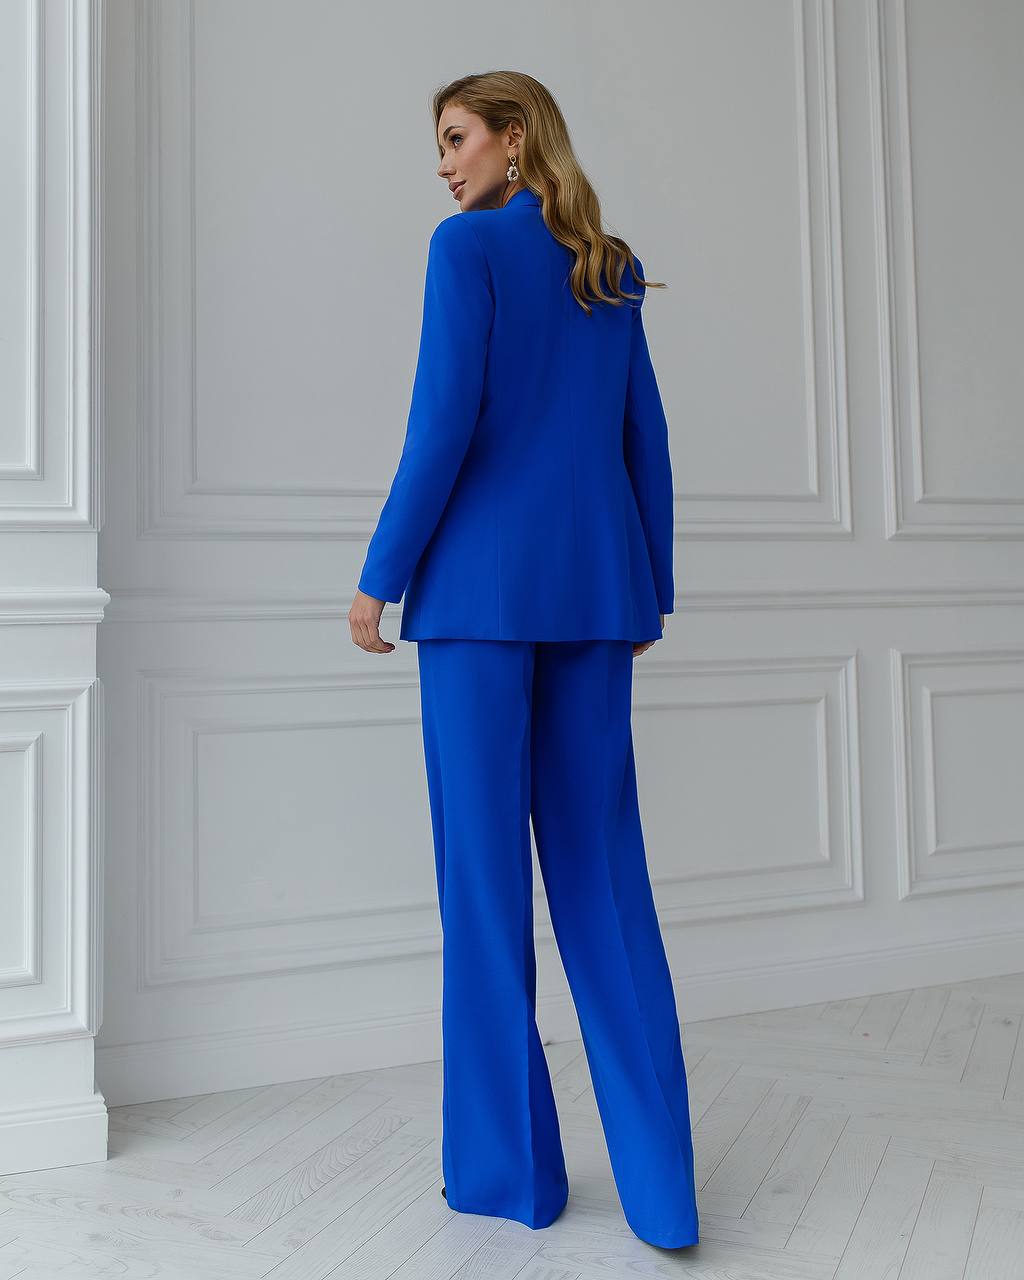 a woman in a blue suit stands in a white room